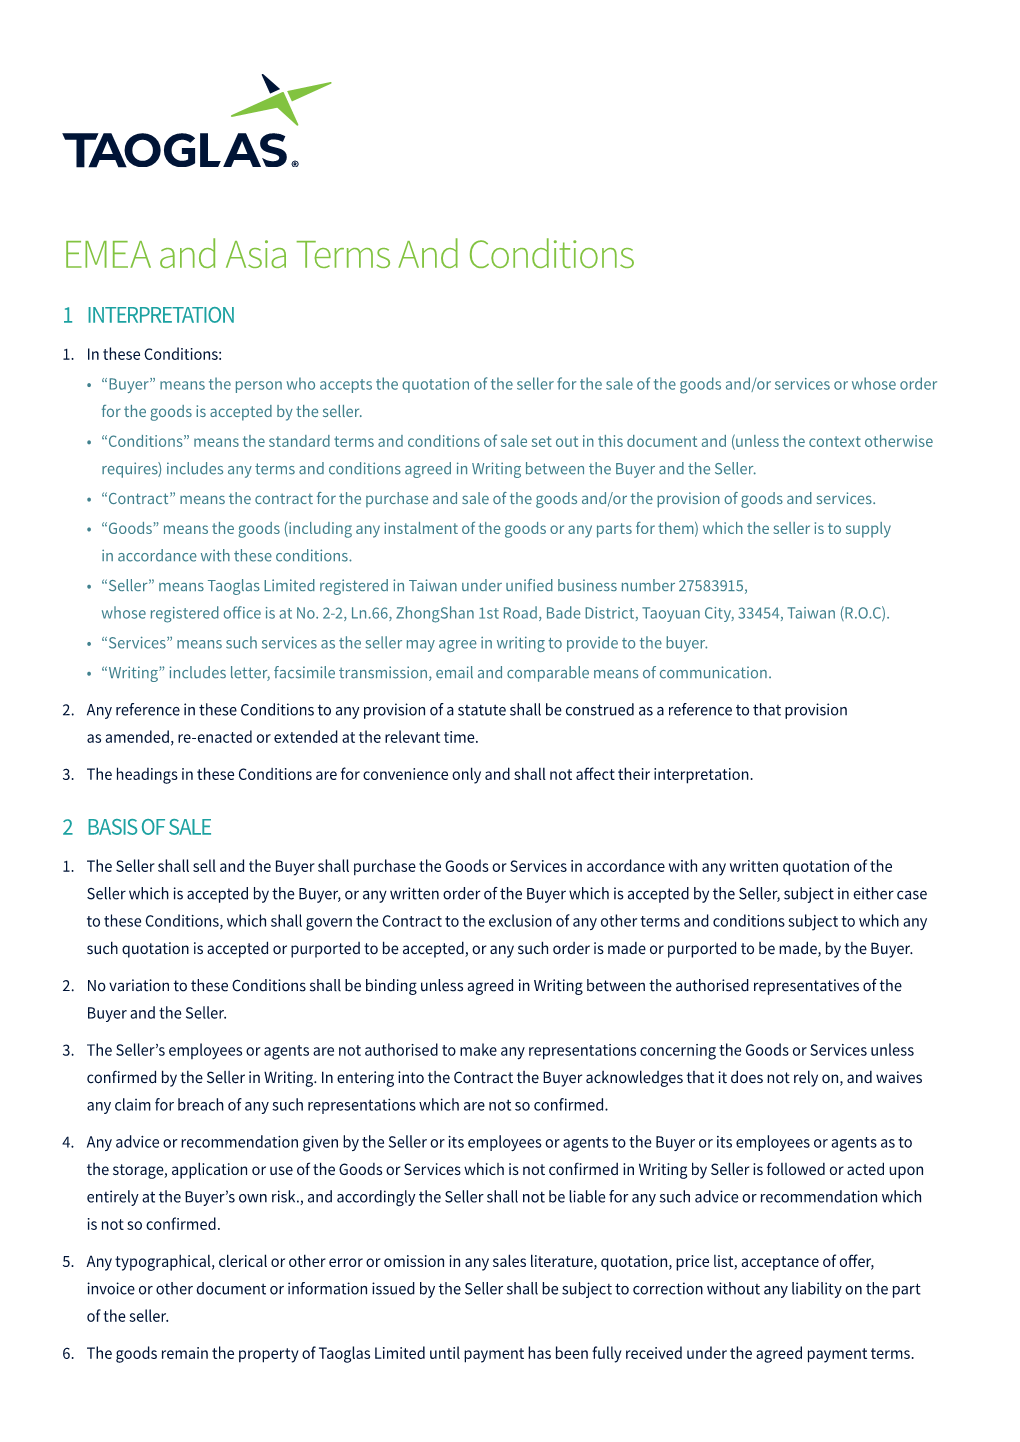 EMEA and Asia Terms and Conditions